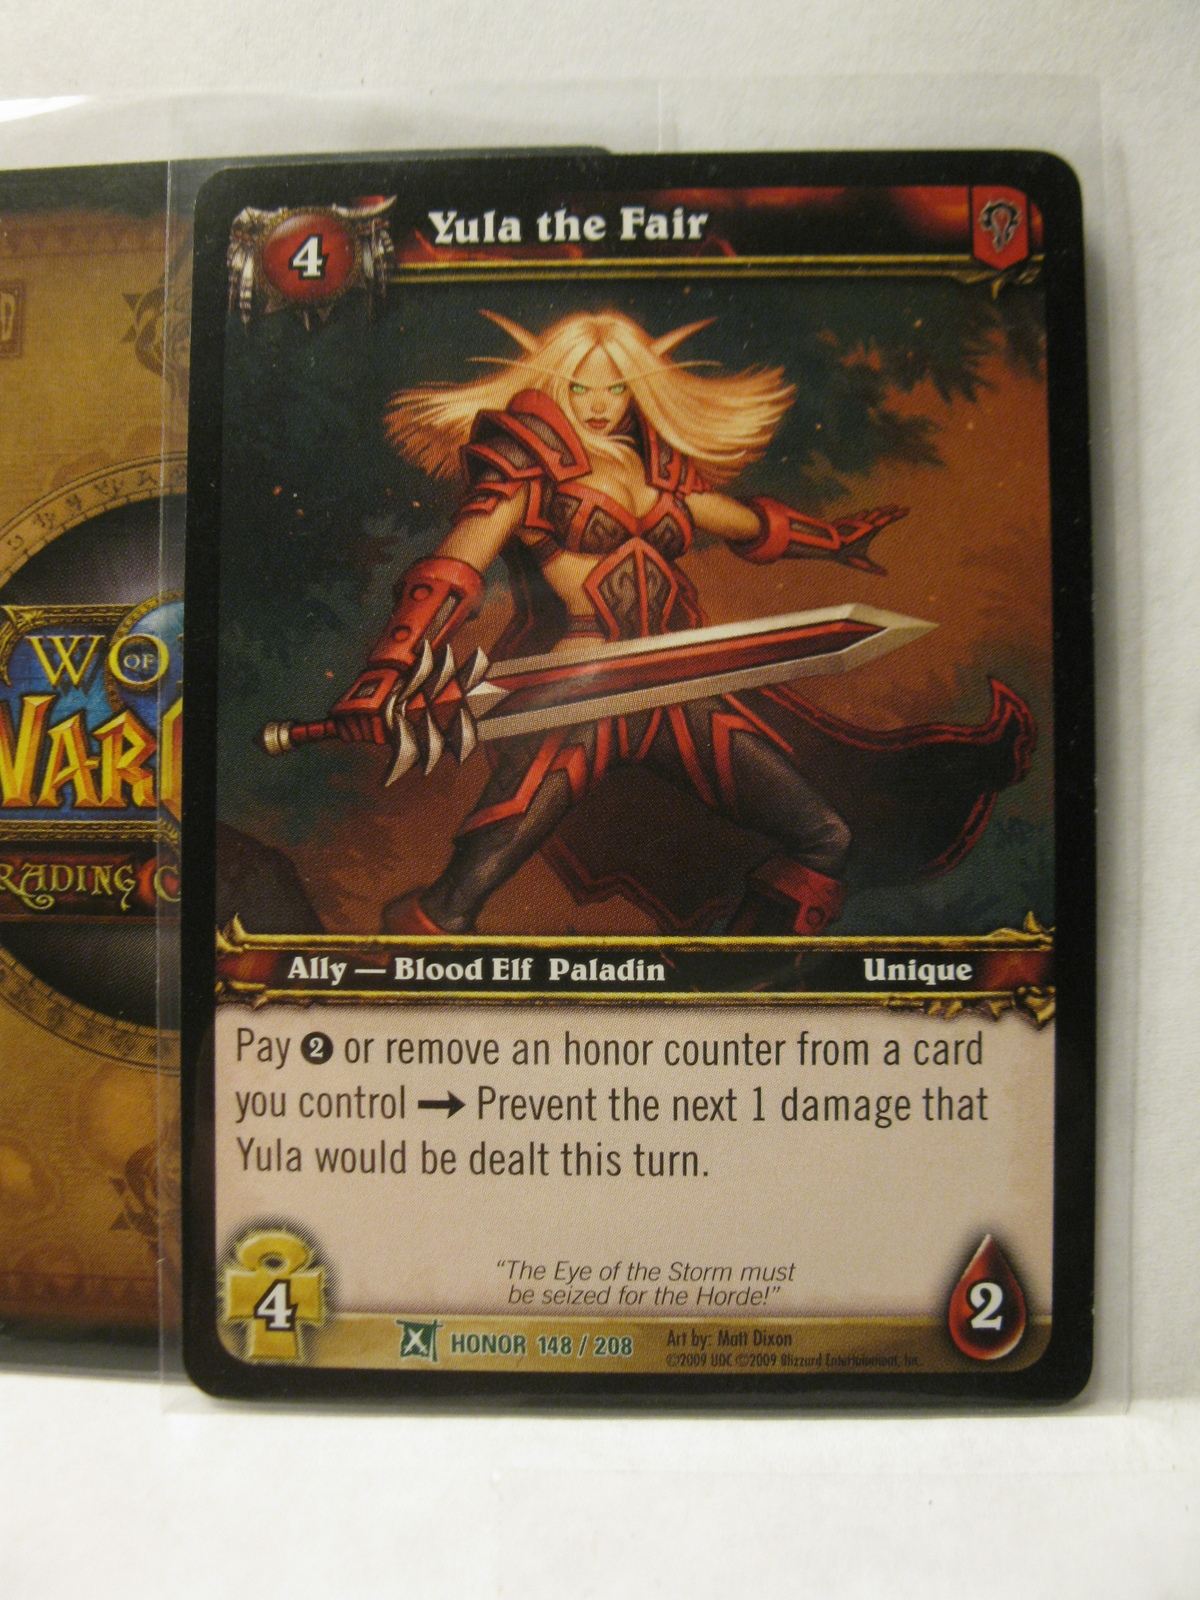 Primary image for (TC-1545) 2009 World of Warcraft Trading Card #148/208: Yula the Fair